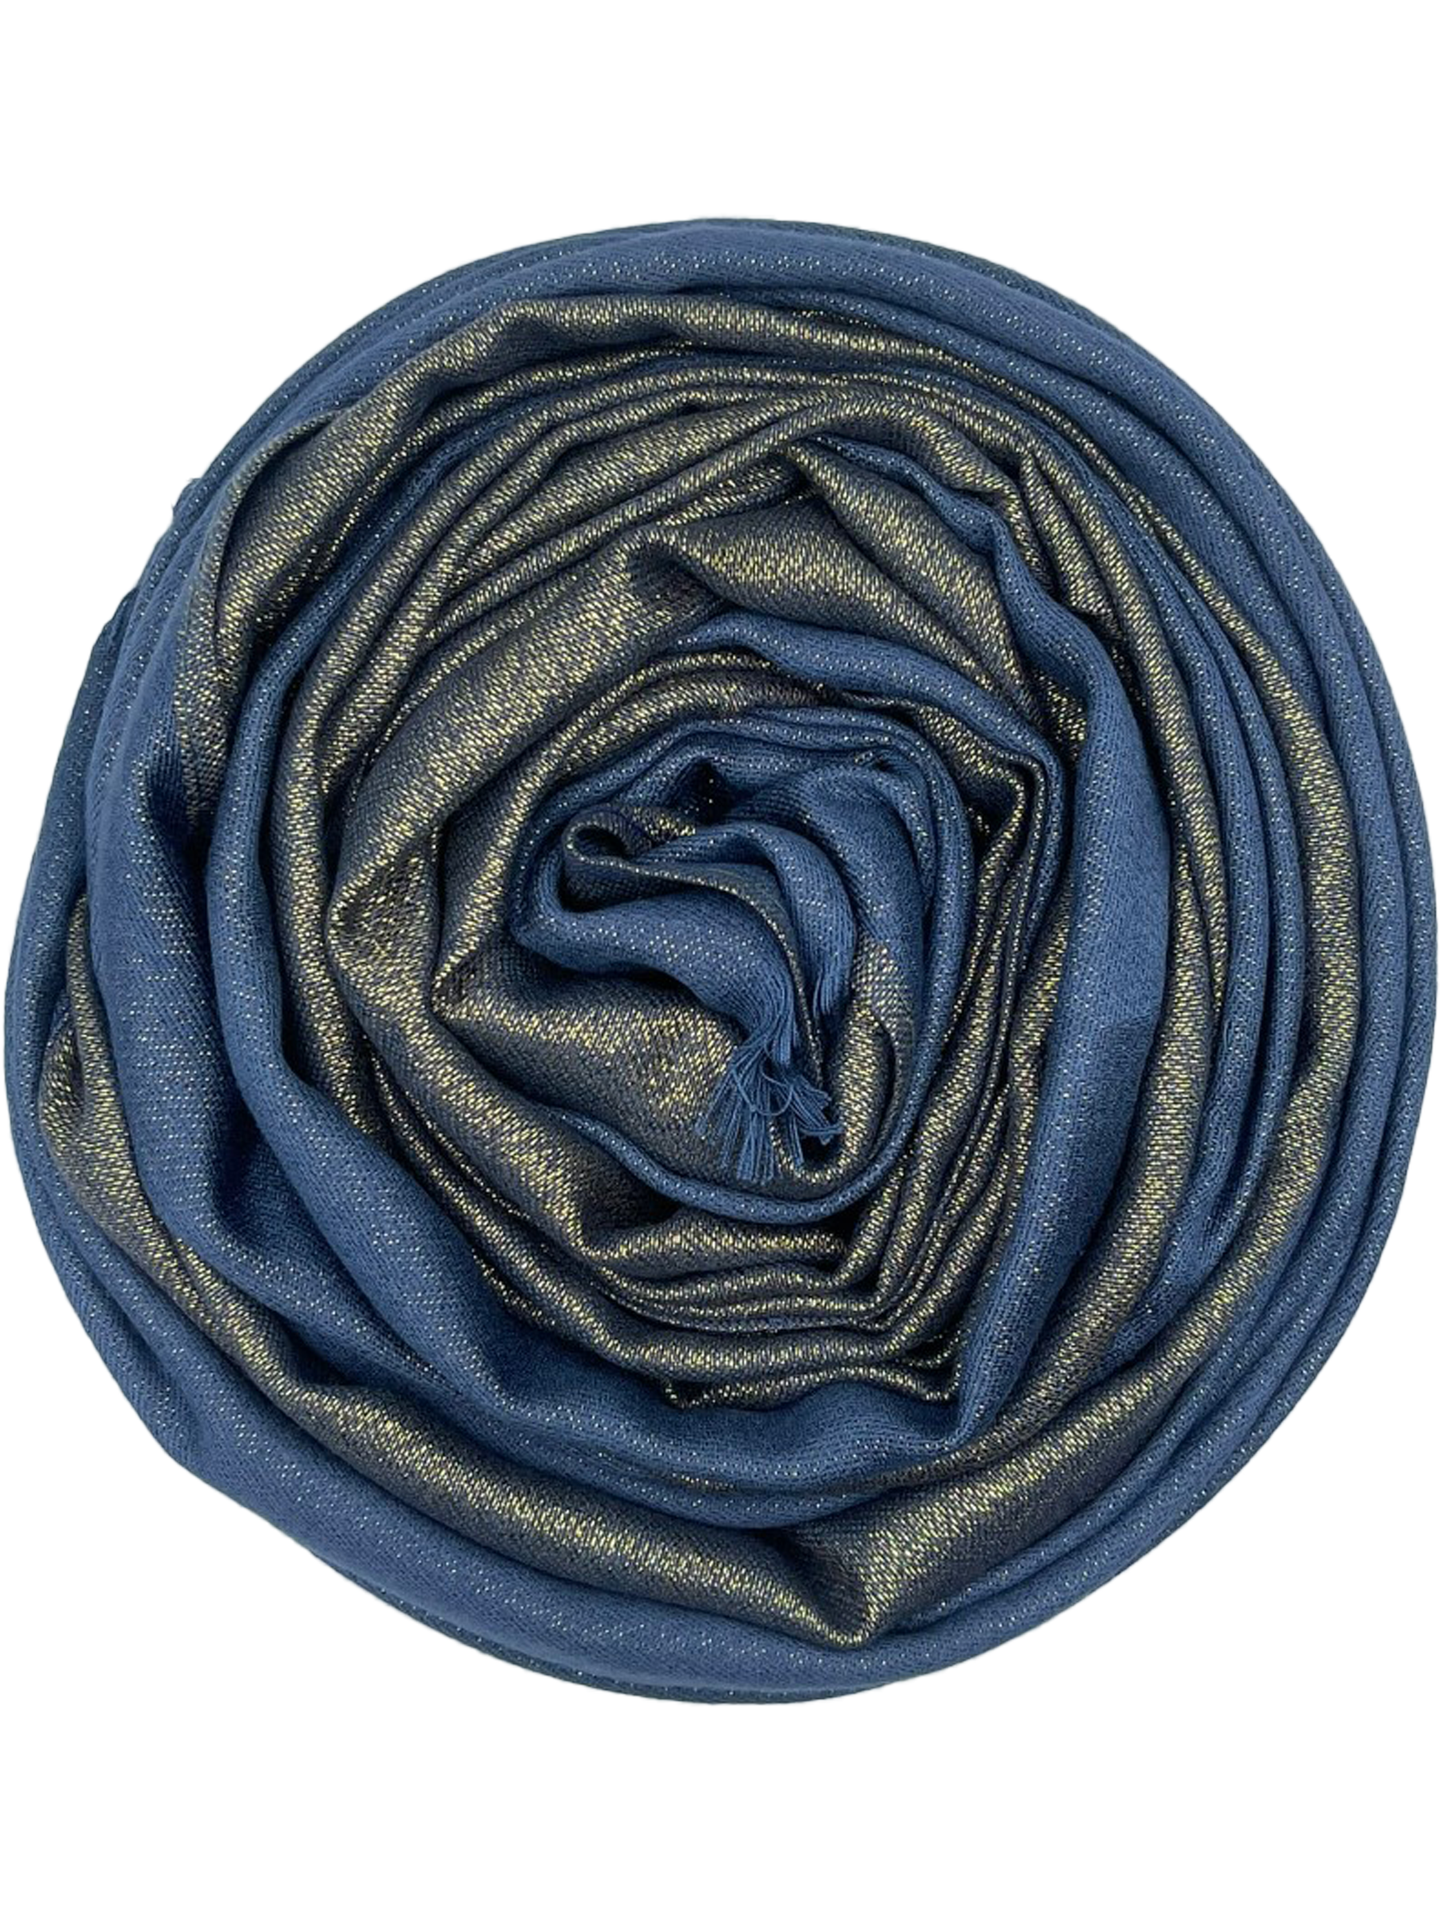 Glamour Scarf - seablue with gold